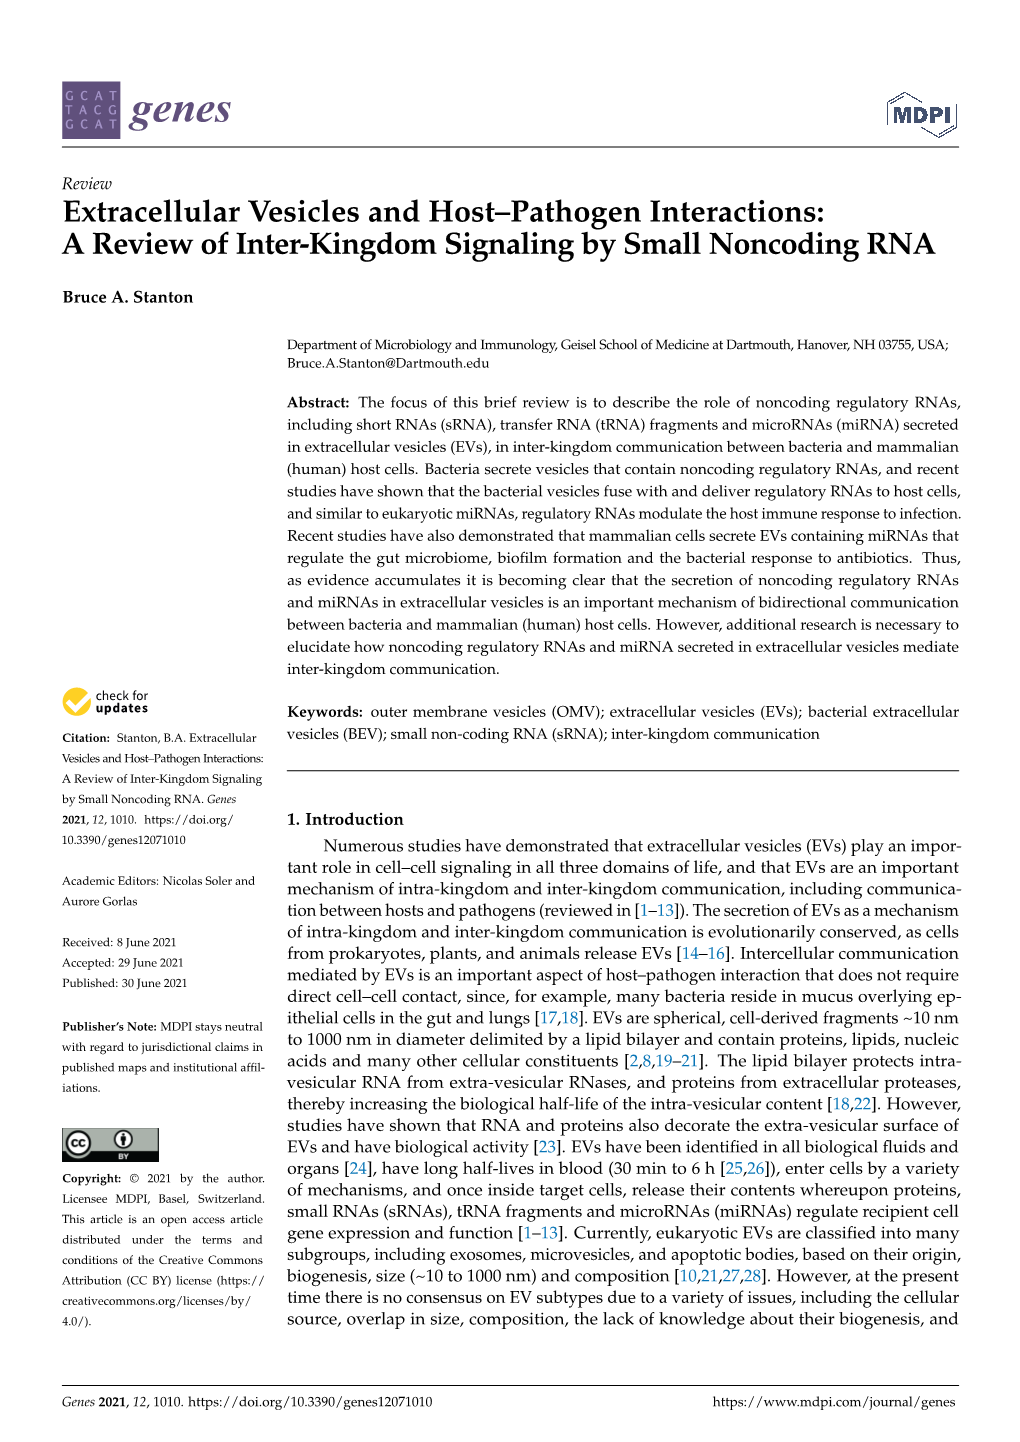 Extracellular Vesicles and Host–Pathogen Interactions: a Review of Inter-Kingdom Signaling by Small Noncoding RNA